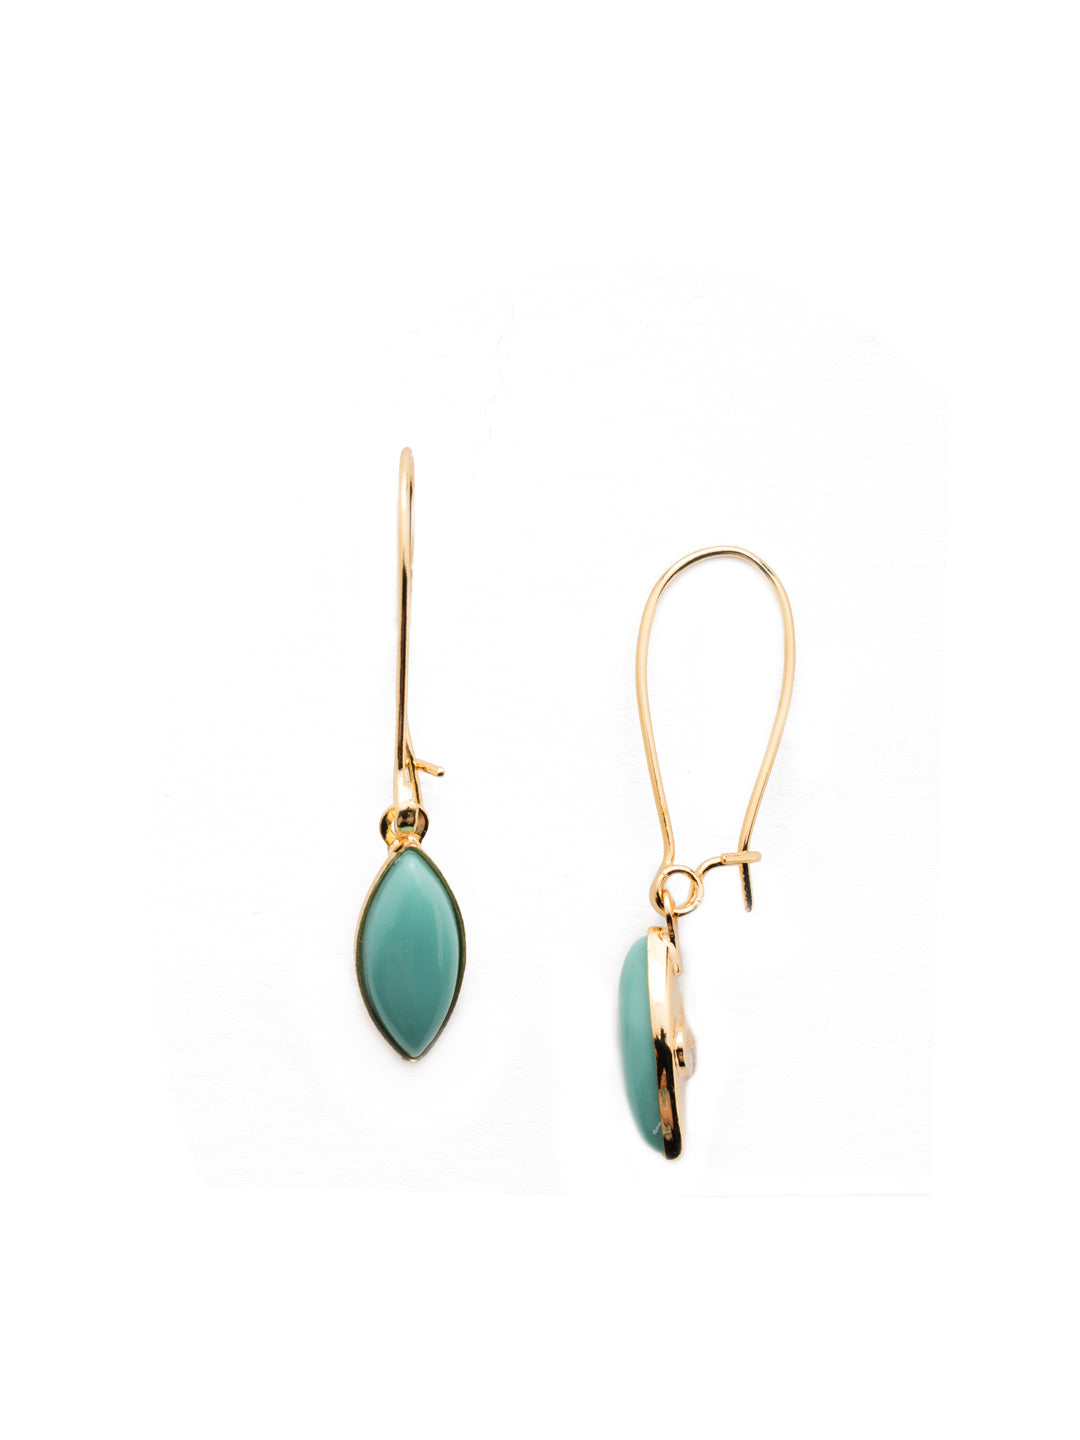 Noah Dangle Earring - EEU206BGBM - A delicate metal wire hangs a colorful navette crystal. From Sorrelli's AGBM collection in our Bright Gold-tone finish.